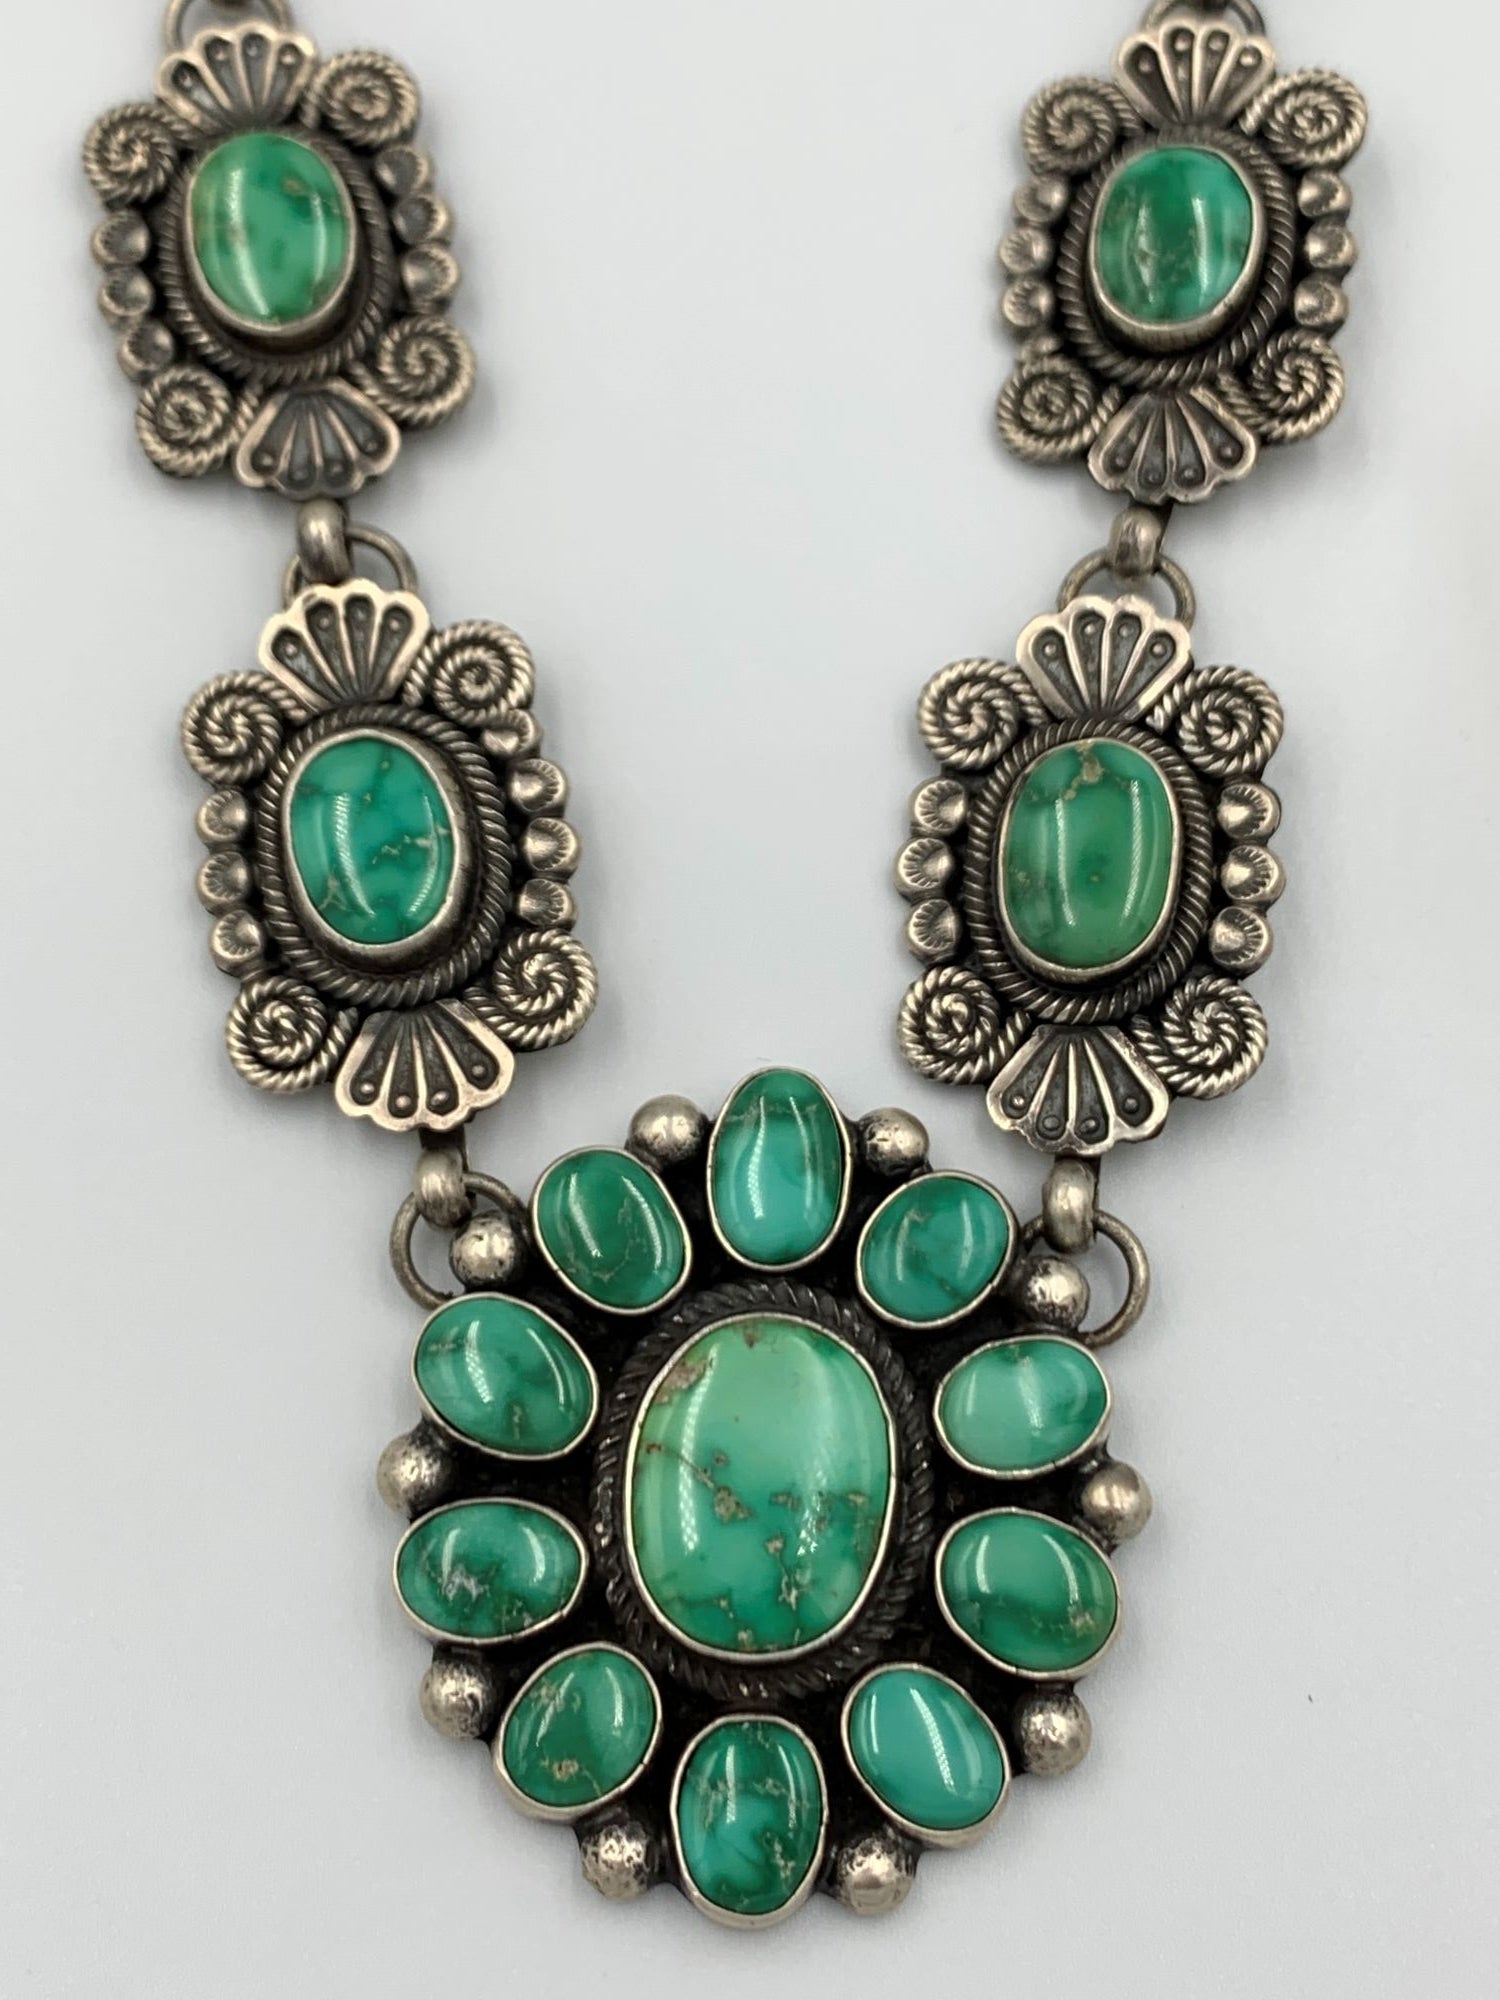 Sterling silver necklace by Navajo silversmith Leon Martinez. The adjustable 30-35” necklace featuring fine stamp and applique work is set with high grade Royston Turquoise.   Each of the twelve 7/8” x 1 1/4” hand stamped stations display a 3/8” x